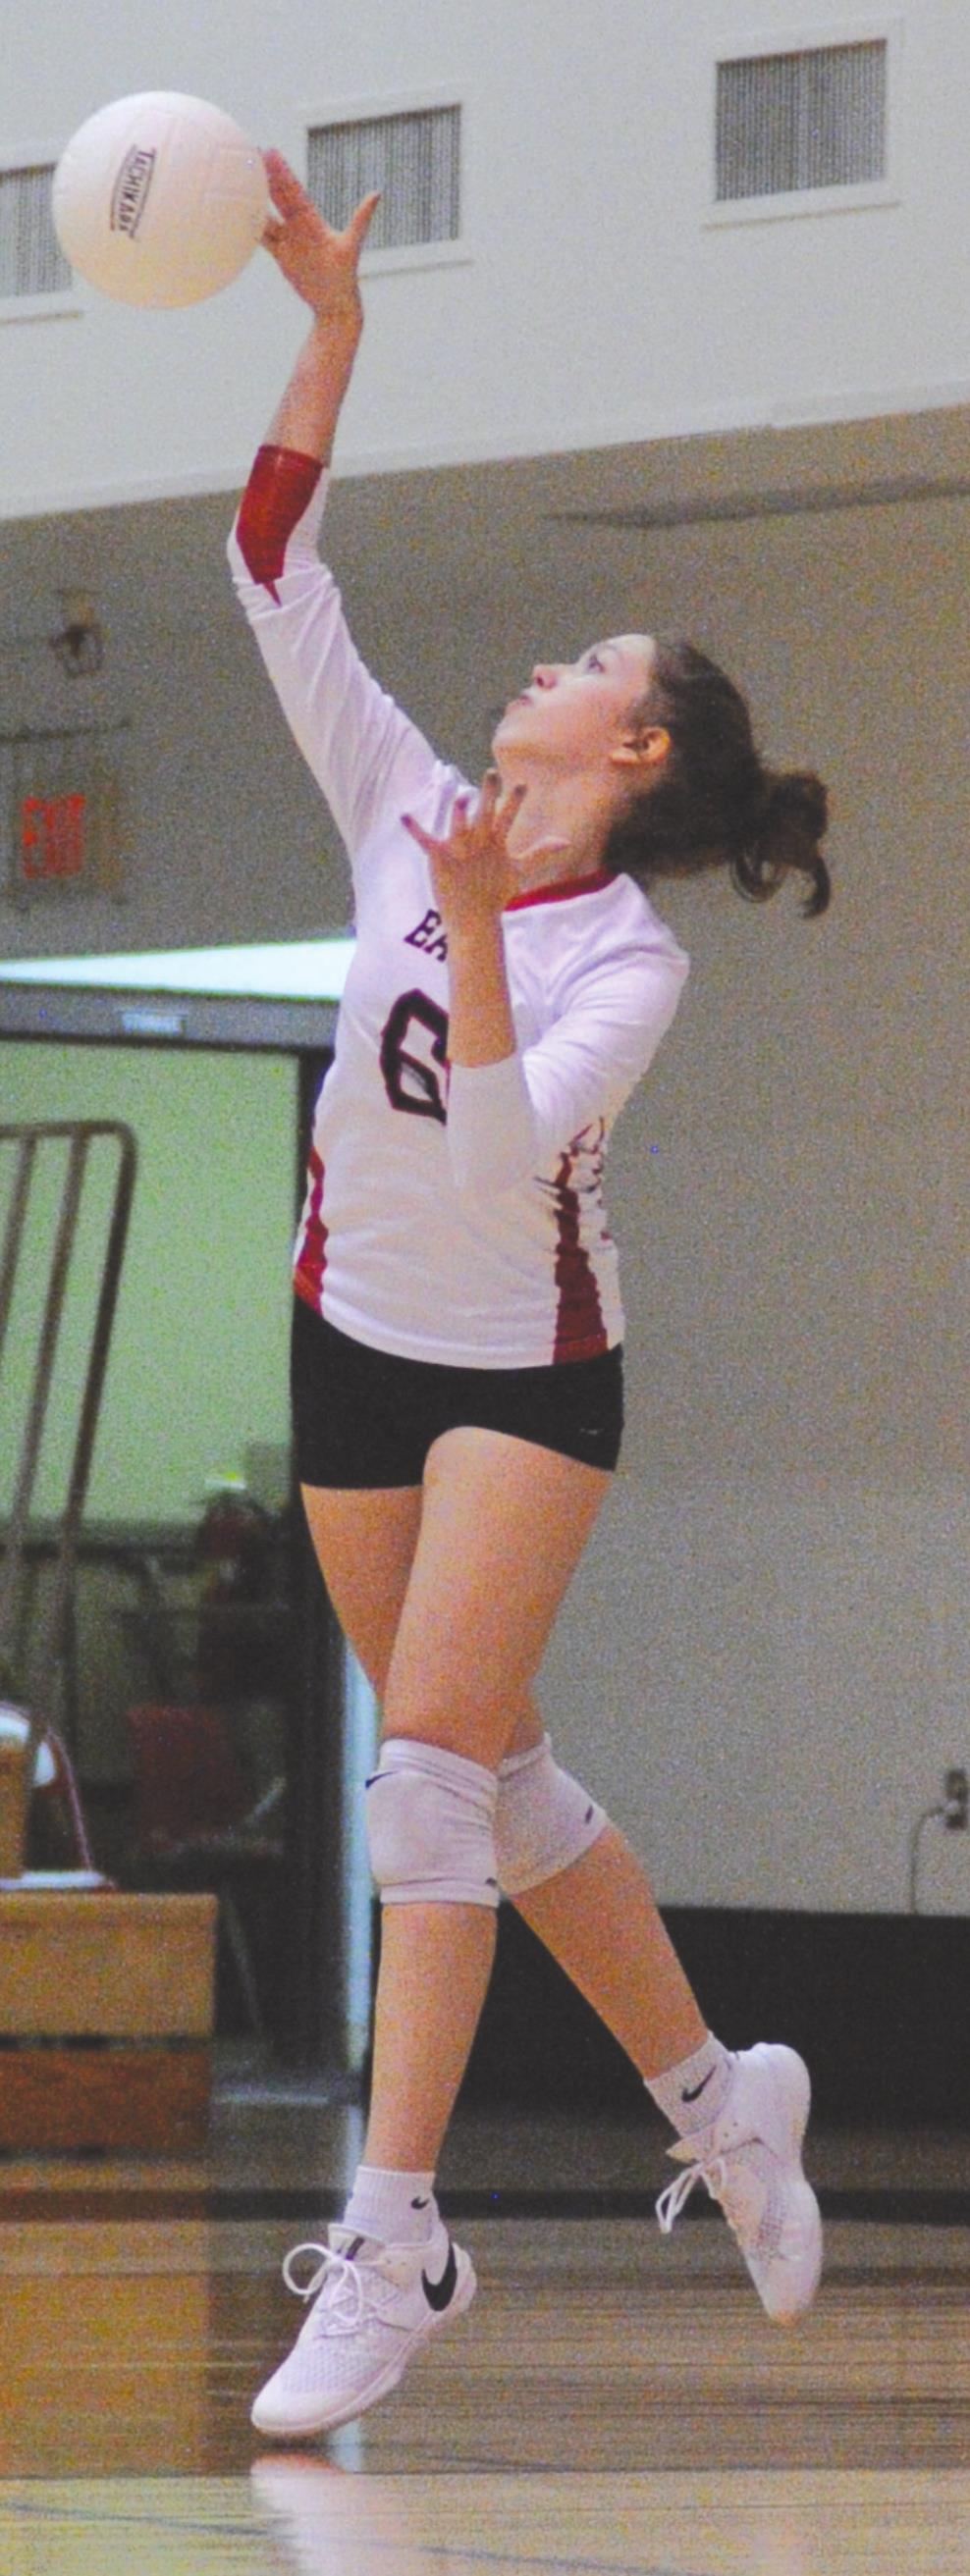 Lakin Green, shown serving here, was instrumental in Weatherford’s 3-0 victory against Sharon-Mutual. Josh Burton/WDN